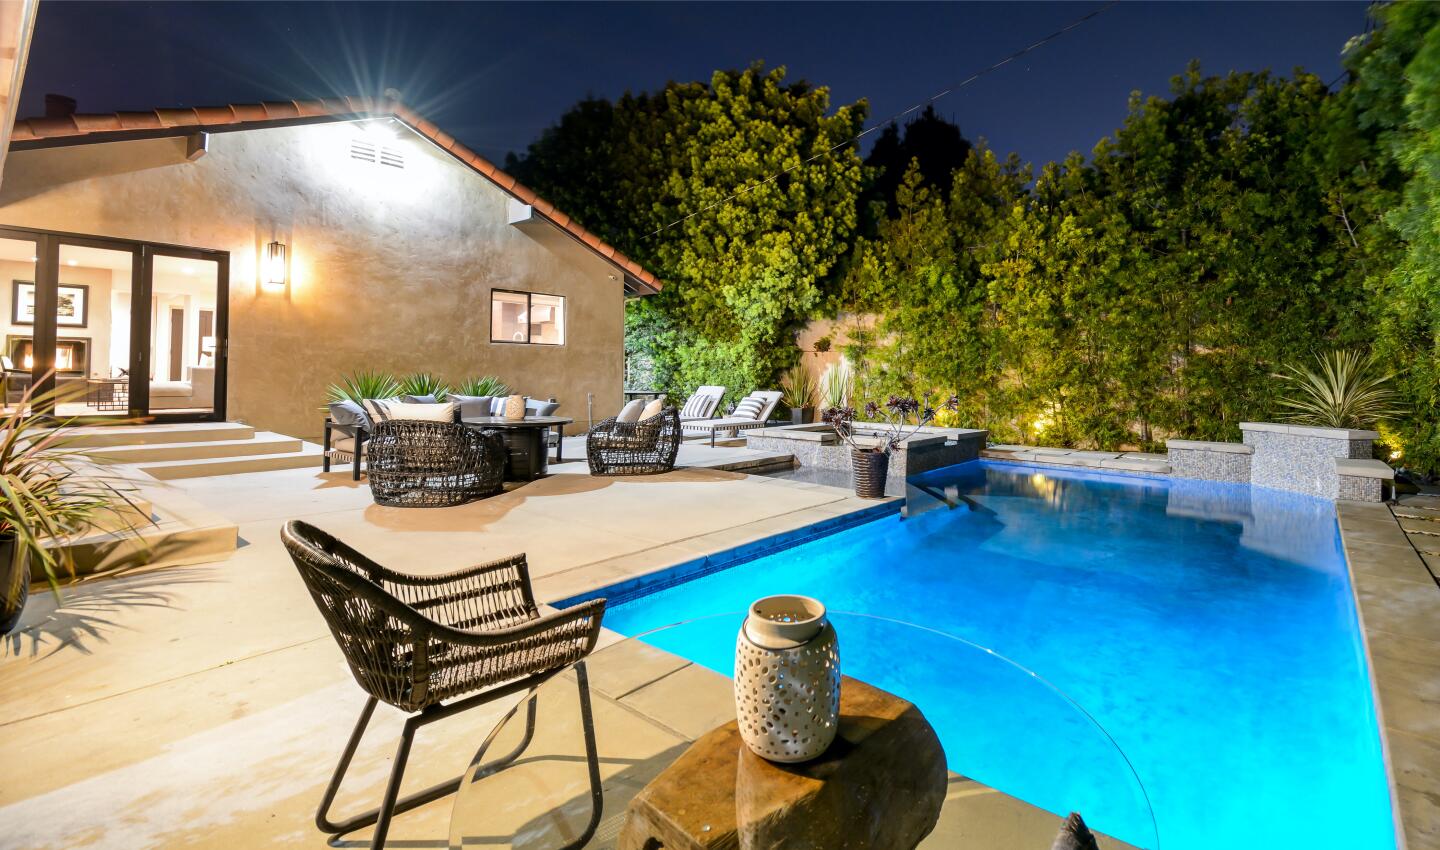 The backyard at night with a pool and patio furniture.